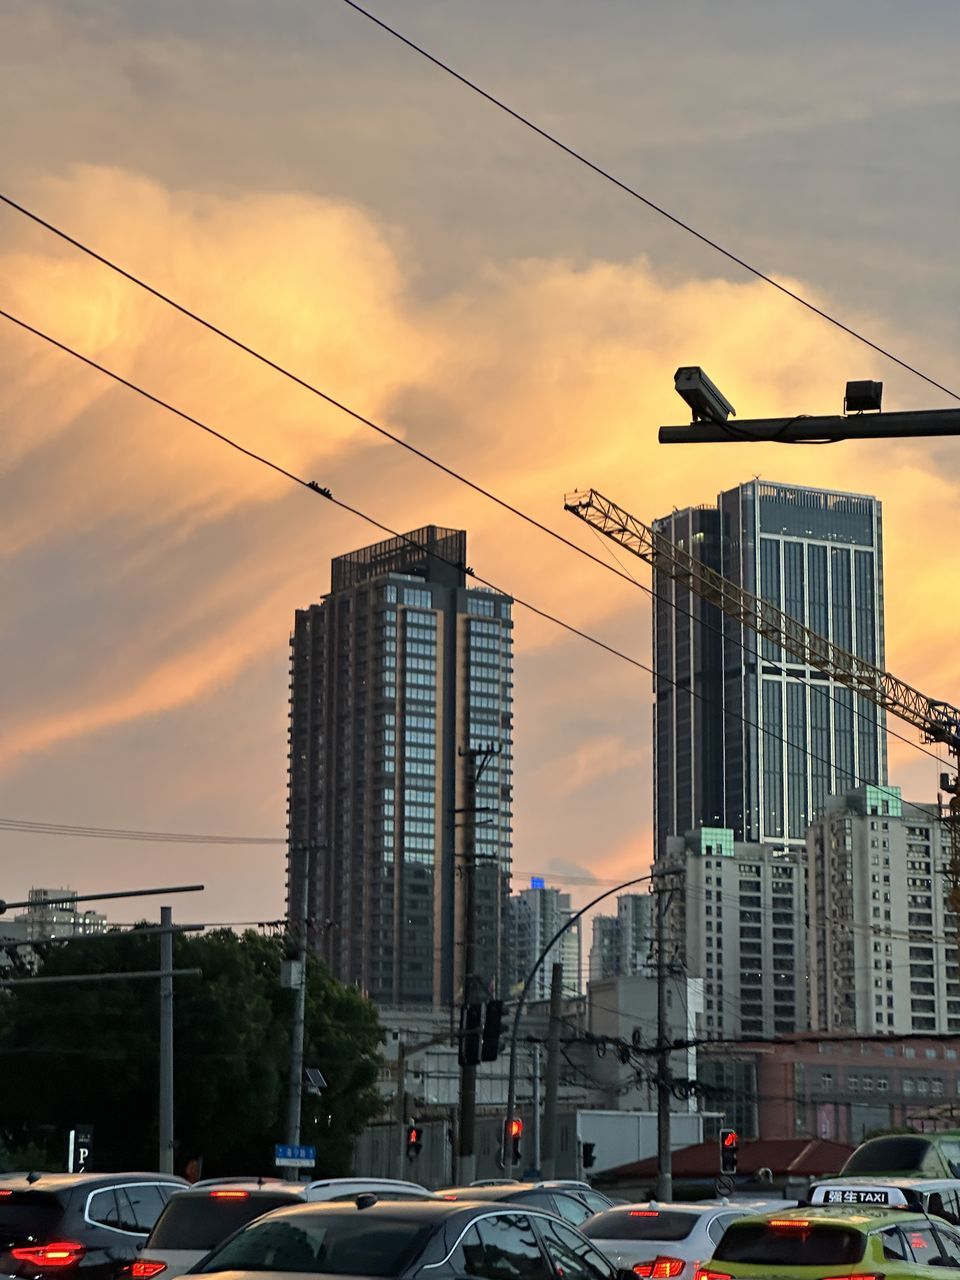 architecture, sky, built structure, city, building exterior, cloud, urban area, electricity, nature, low angle view, skyscraper, building, cable, construction industry, no people, outdoors, transportation, sunset, cityscape, sign, industry, business finance and industry, business